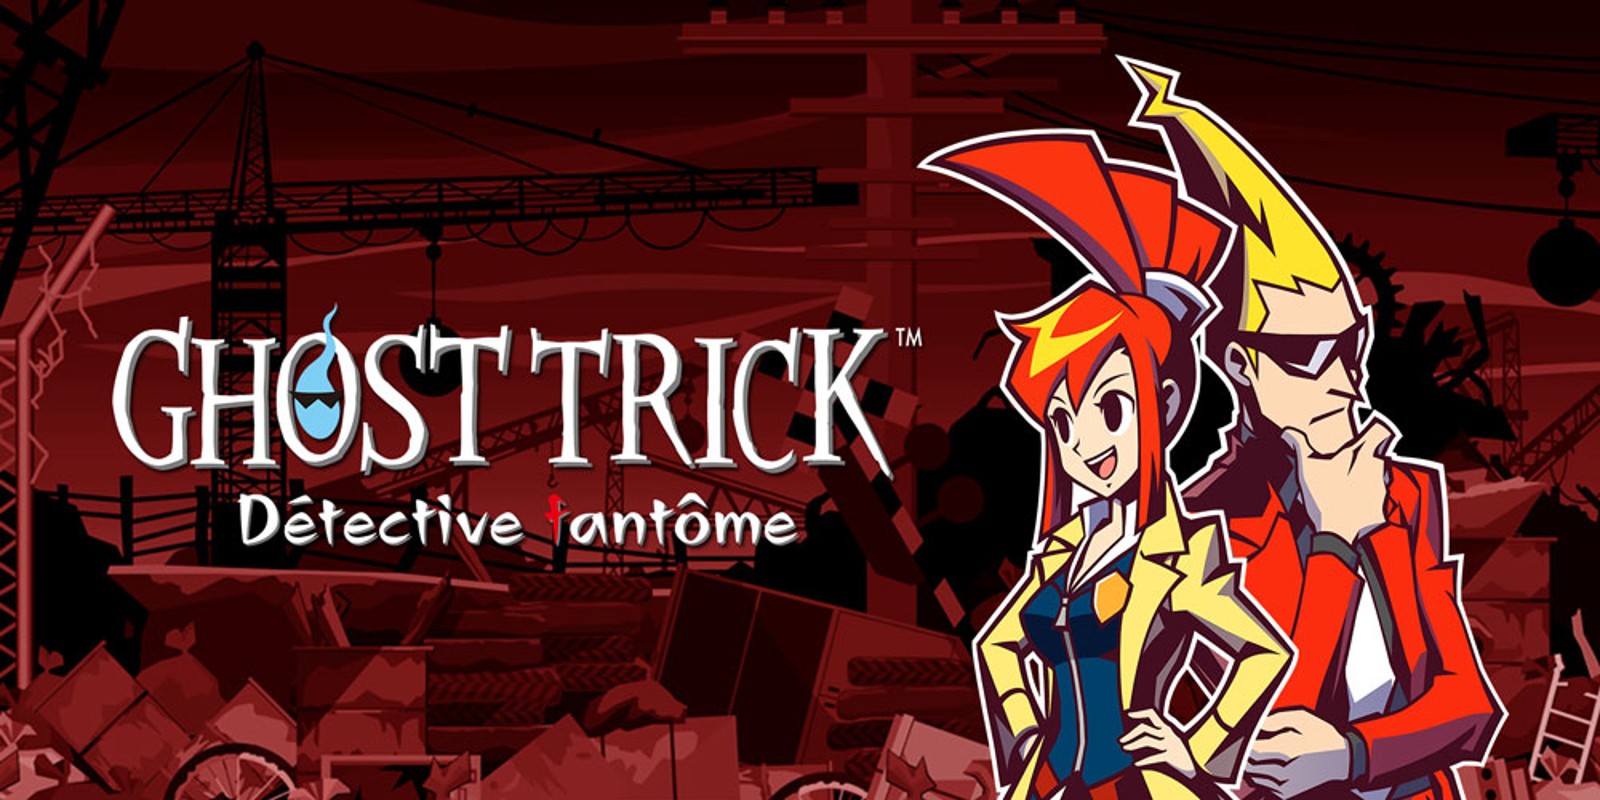 download ghost trick phantom detective switch